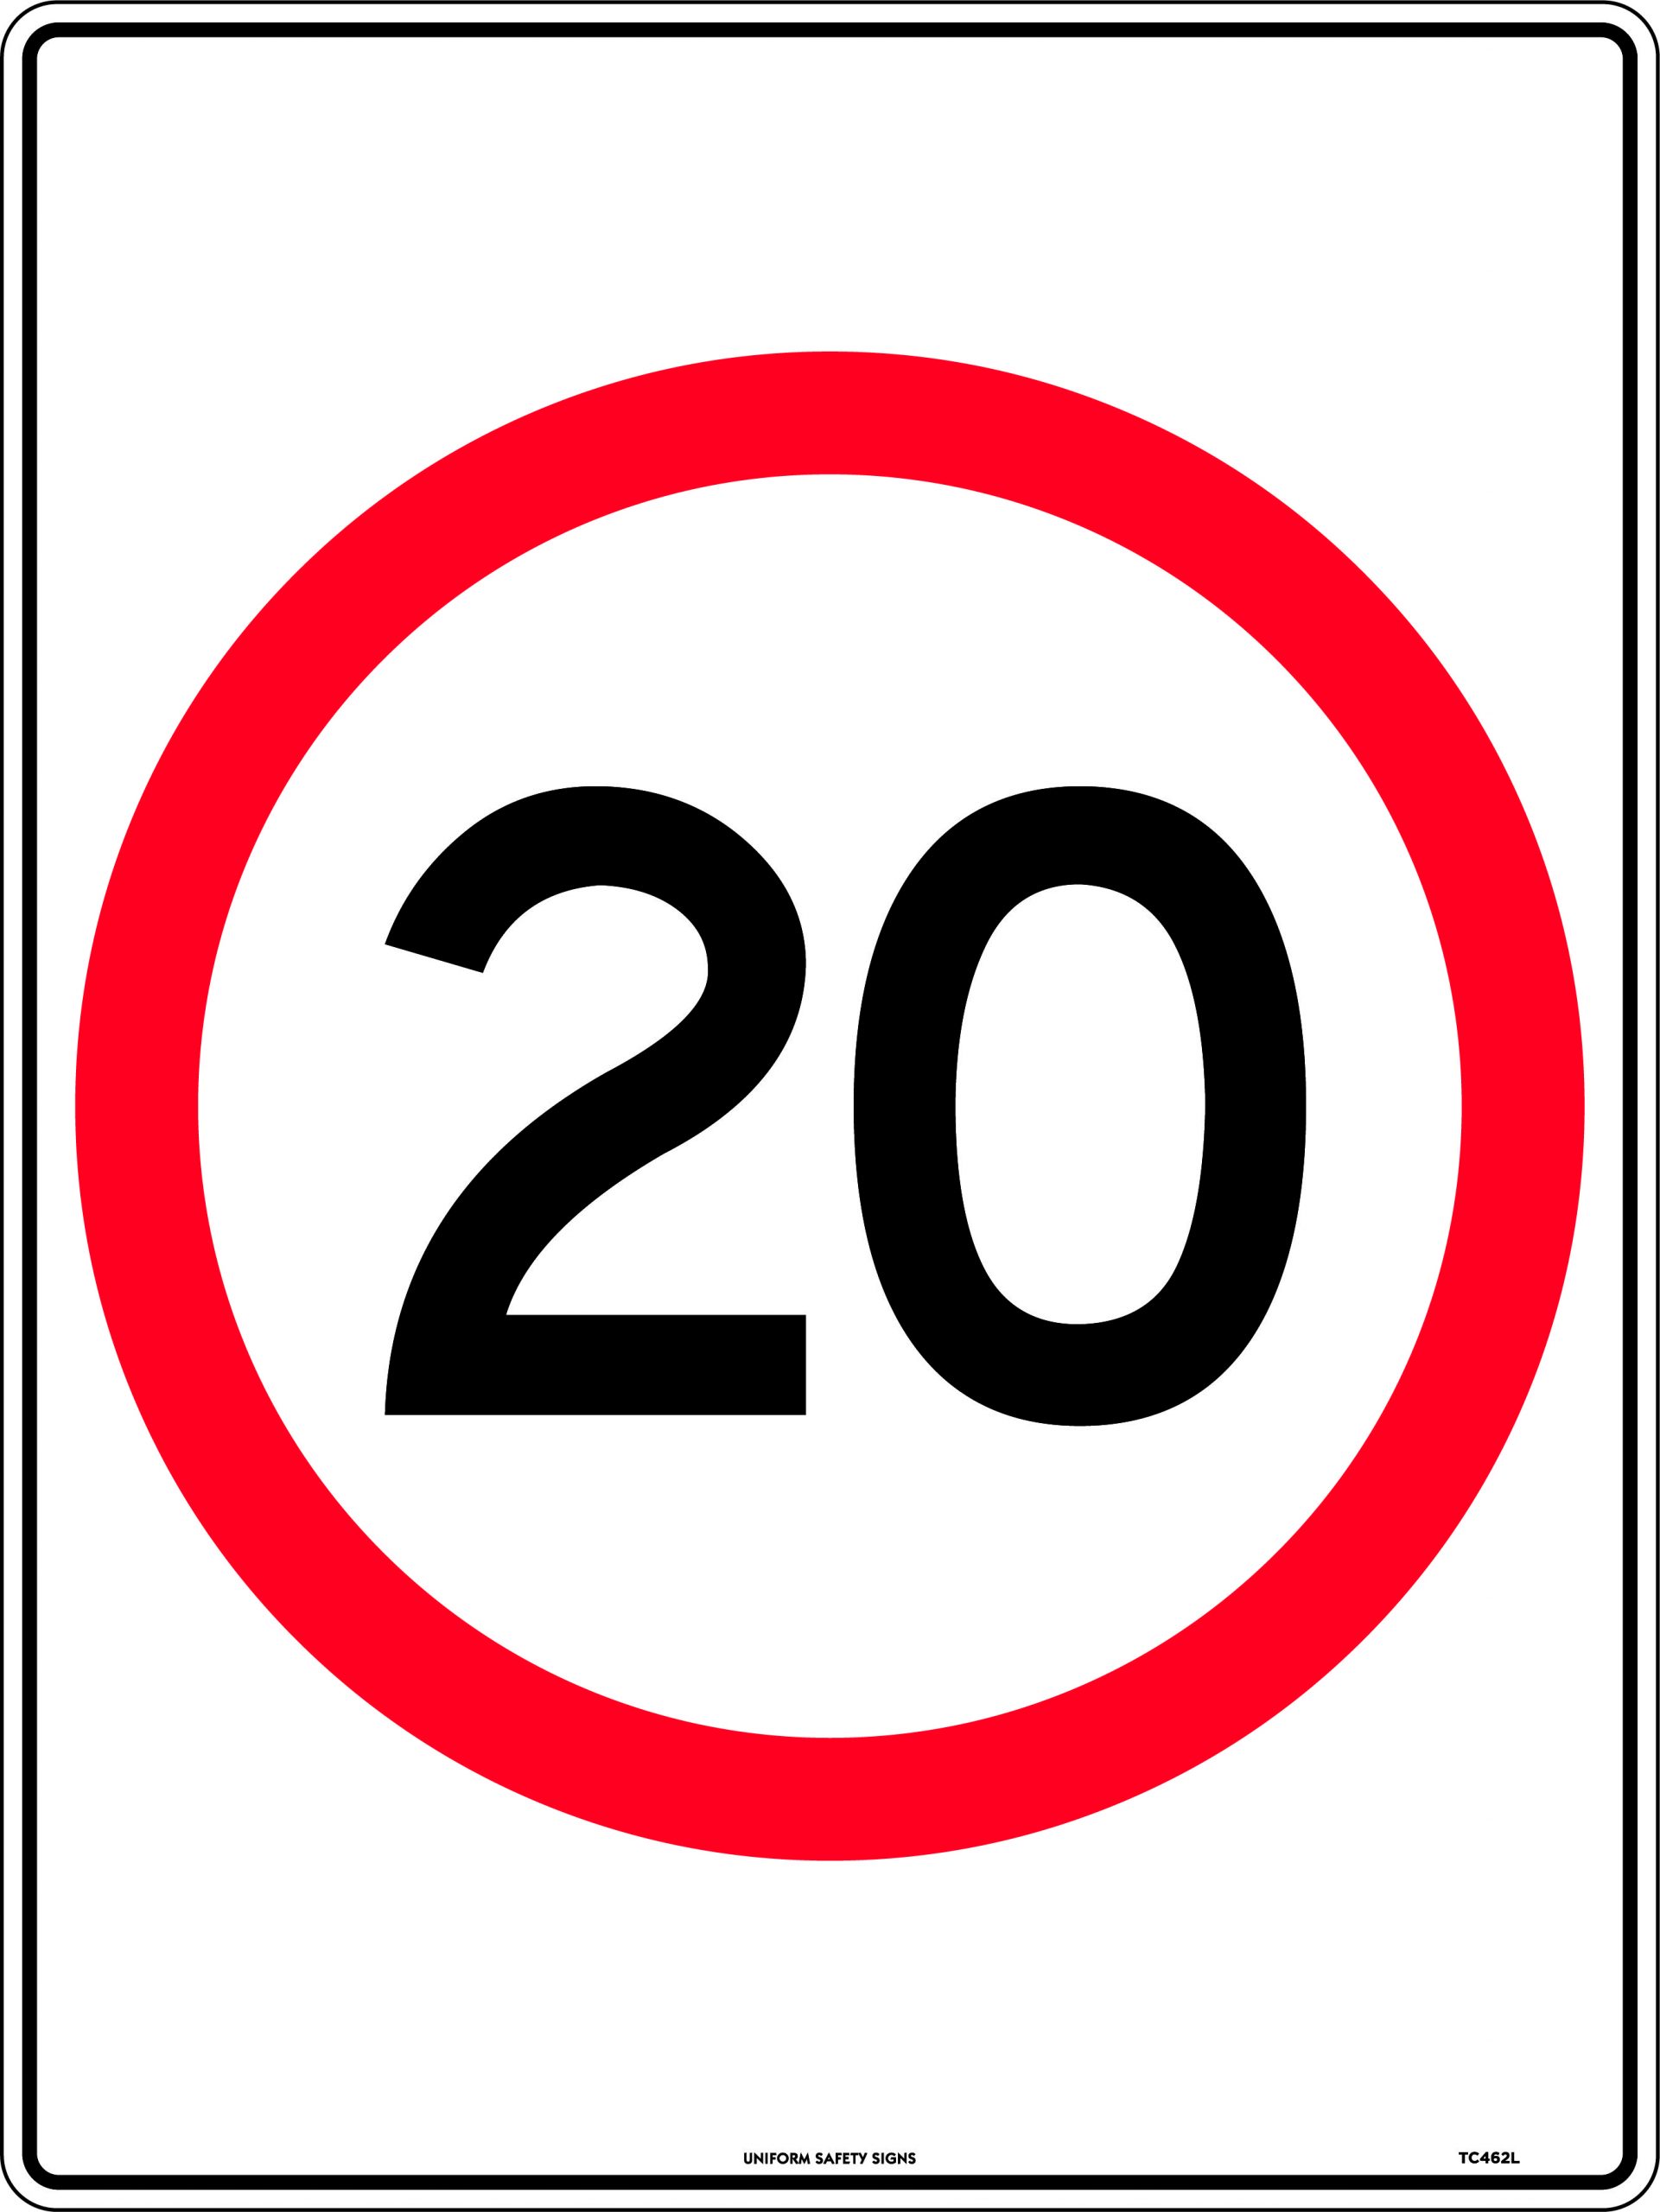 SIGN SIGN SPEED ZONE 20 KM/H 600X450 METAL 94T 